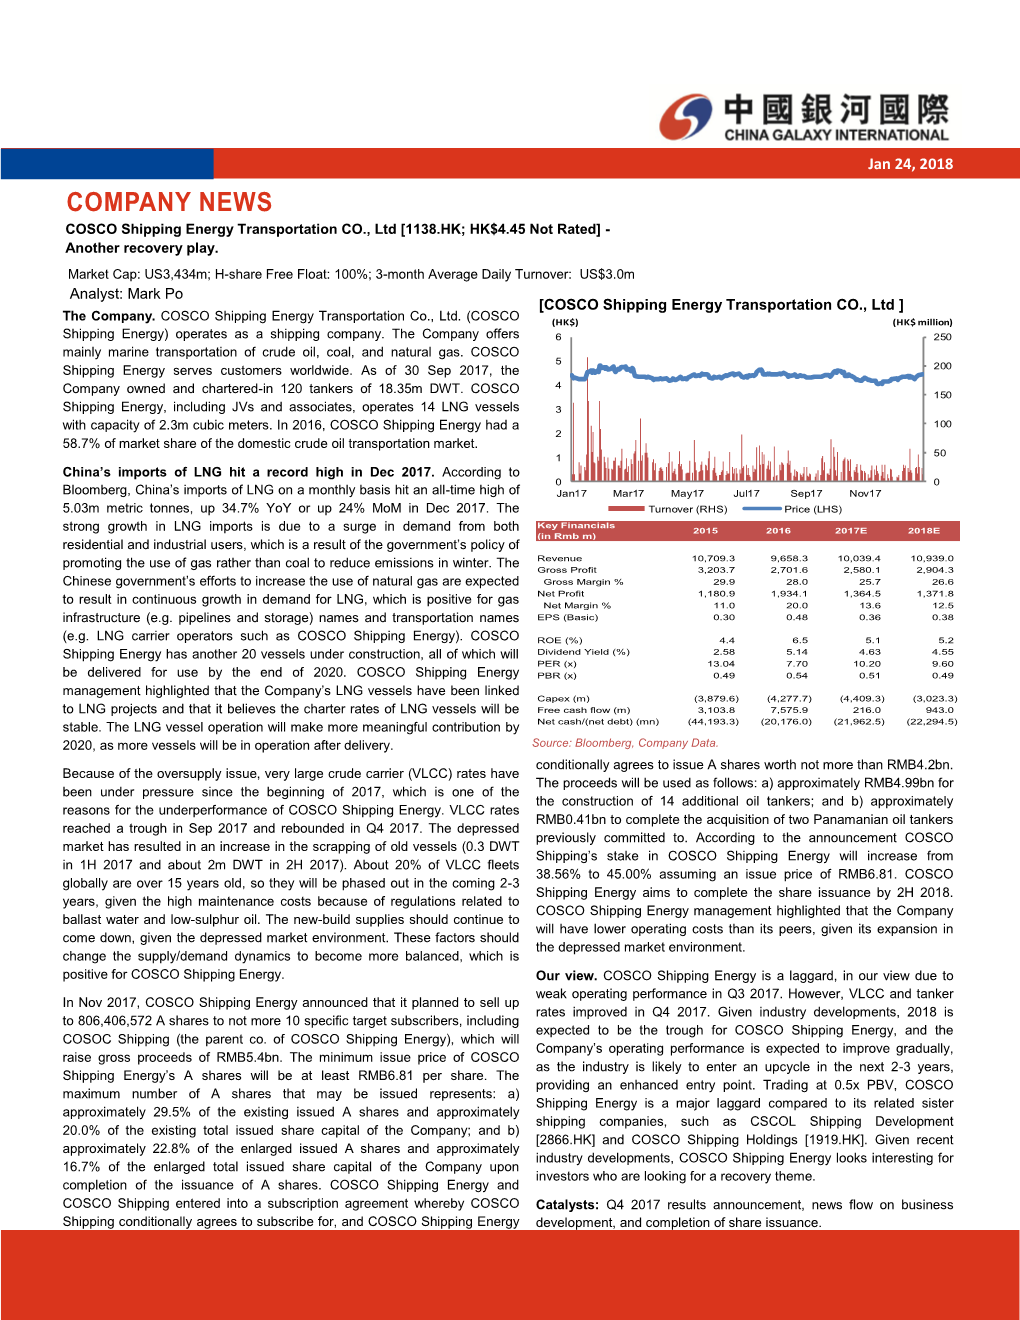 COMPANY NEWS COSCO Shipping Energy Transportation CO., Ltd [1138.HK; HK$4.45 Not Rated] - Another Recovery Play